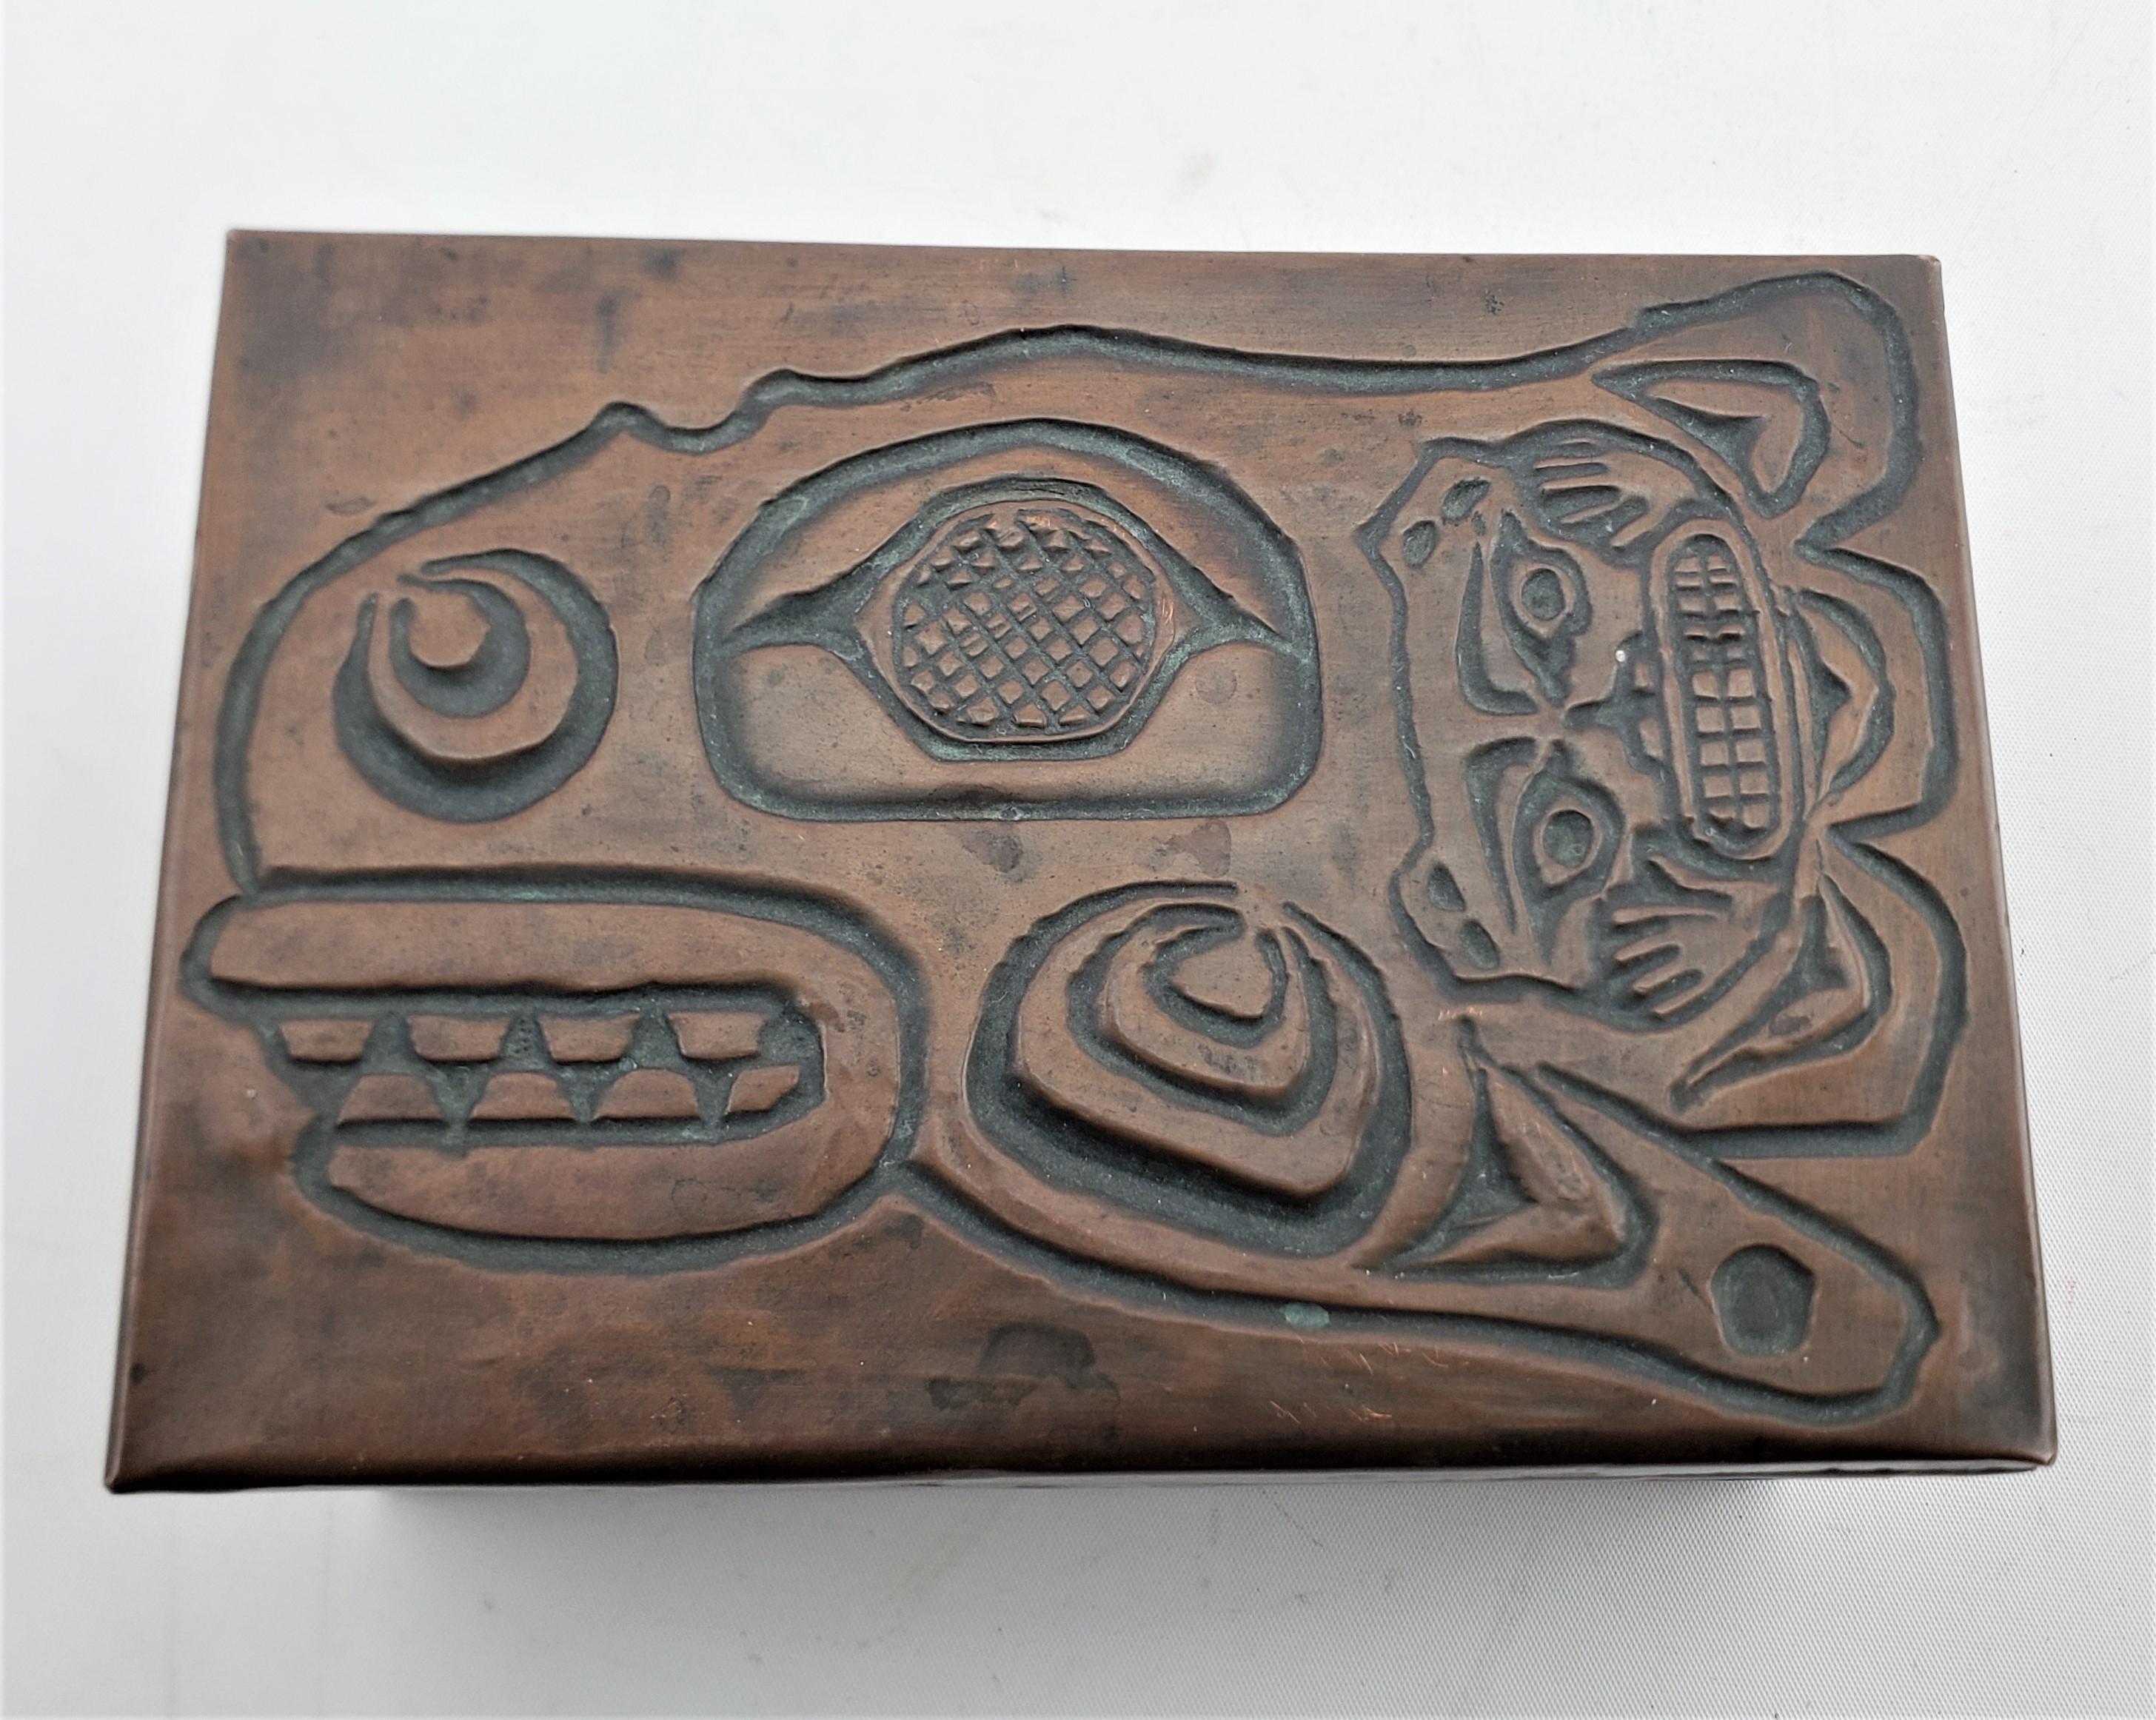 20th Century Mid-Century Era West Coast Haida Styled Copper Covered Box with Repouse Decor